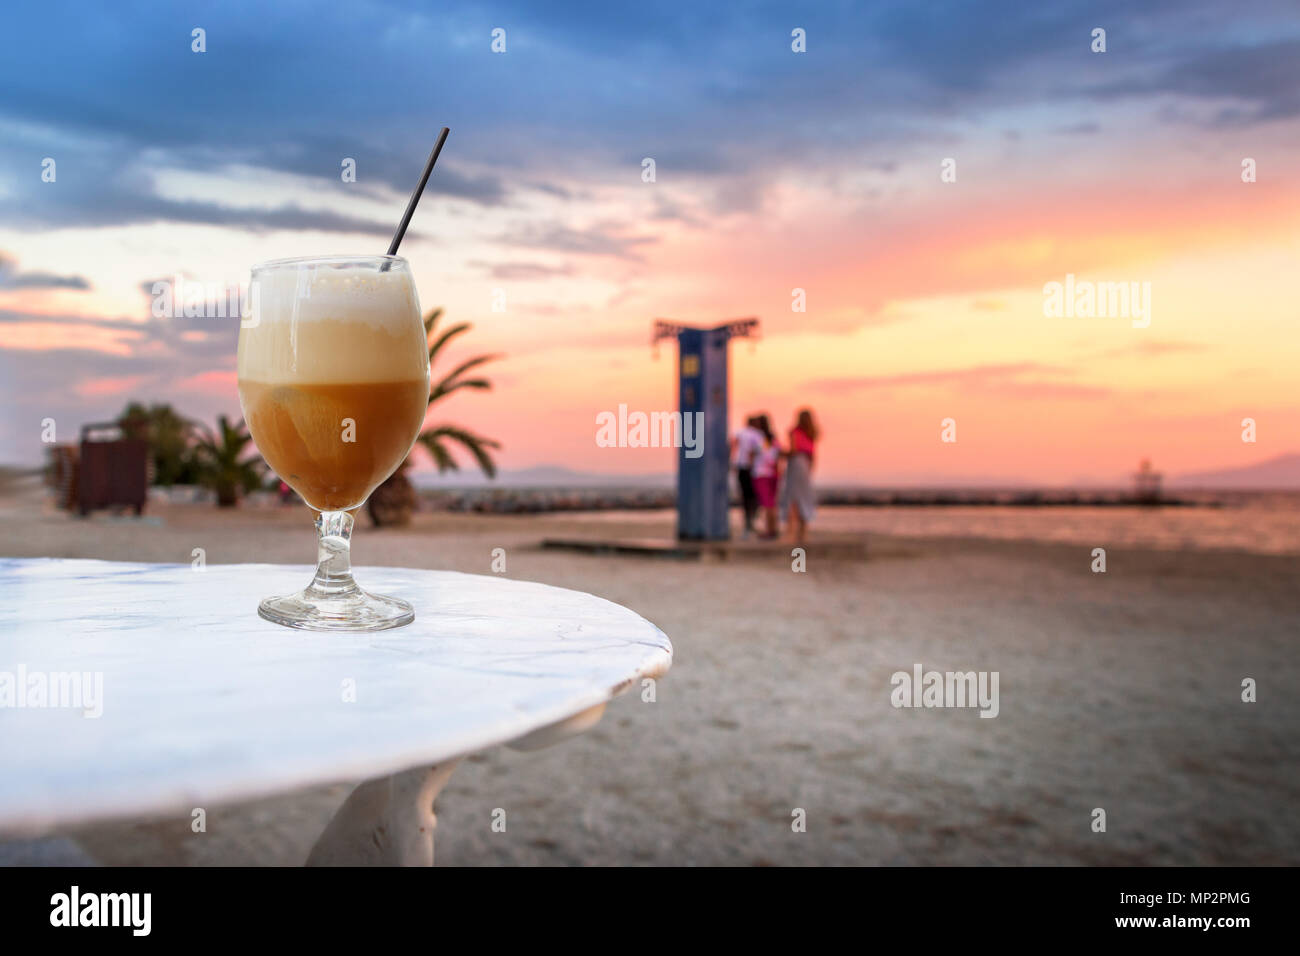 https://c8.alamy.com/comp/MP2PMG/a-glass-of-freddo-cappuccino-cold-coffee-over-a-beach-at-sunset-background-in-volos-greece-MP2PMG.jpg